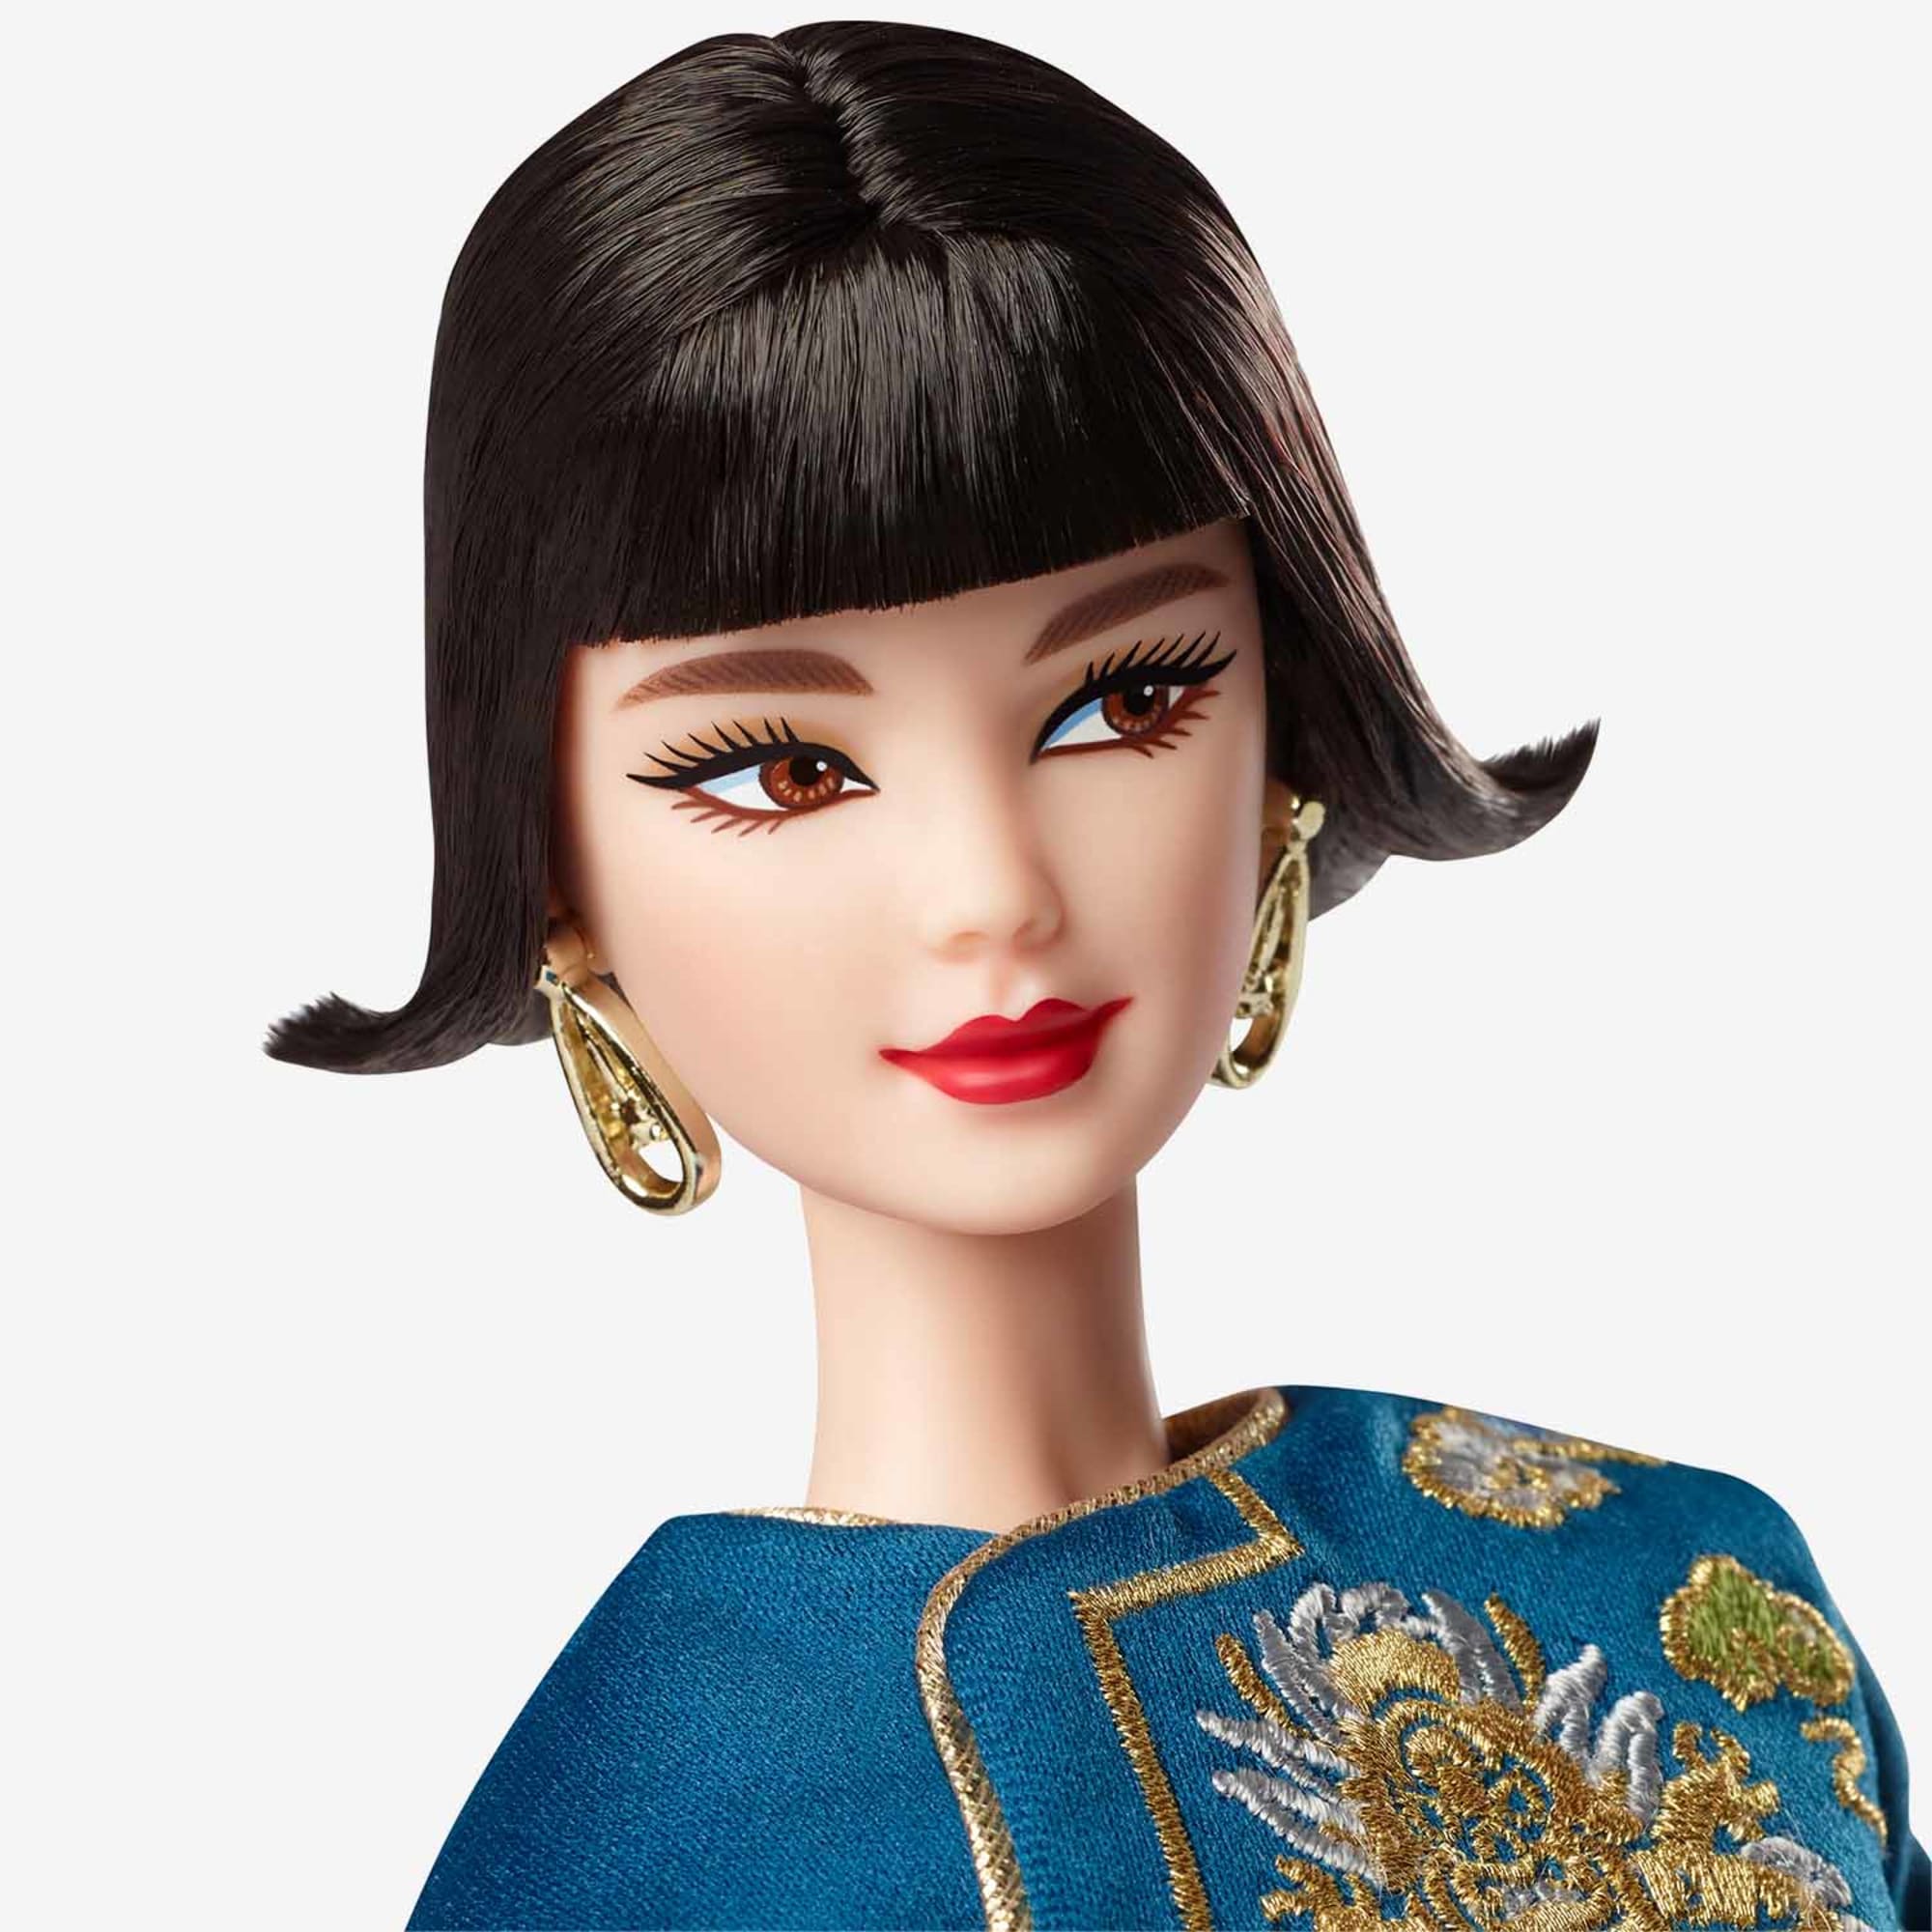 2023 Barbie Lunar New Year Doll Designed by Guo Pei Mattel Creations